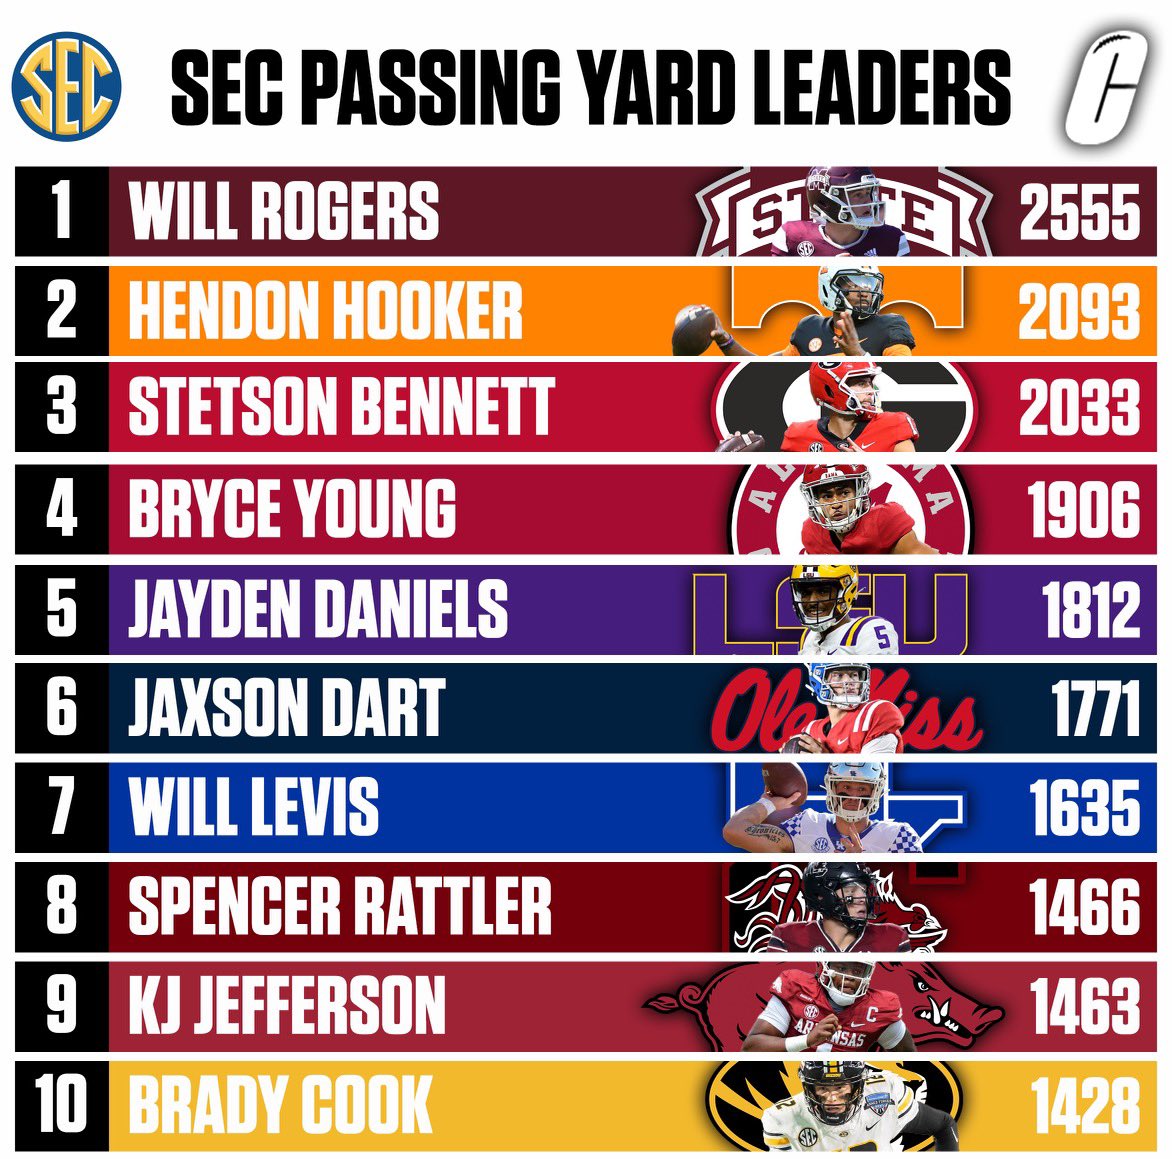 Your current SEC College Football Passing Yard leaders.👀 #SEC #CollegeFootball #cfb #NCAAF